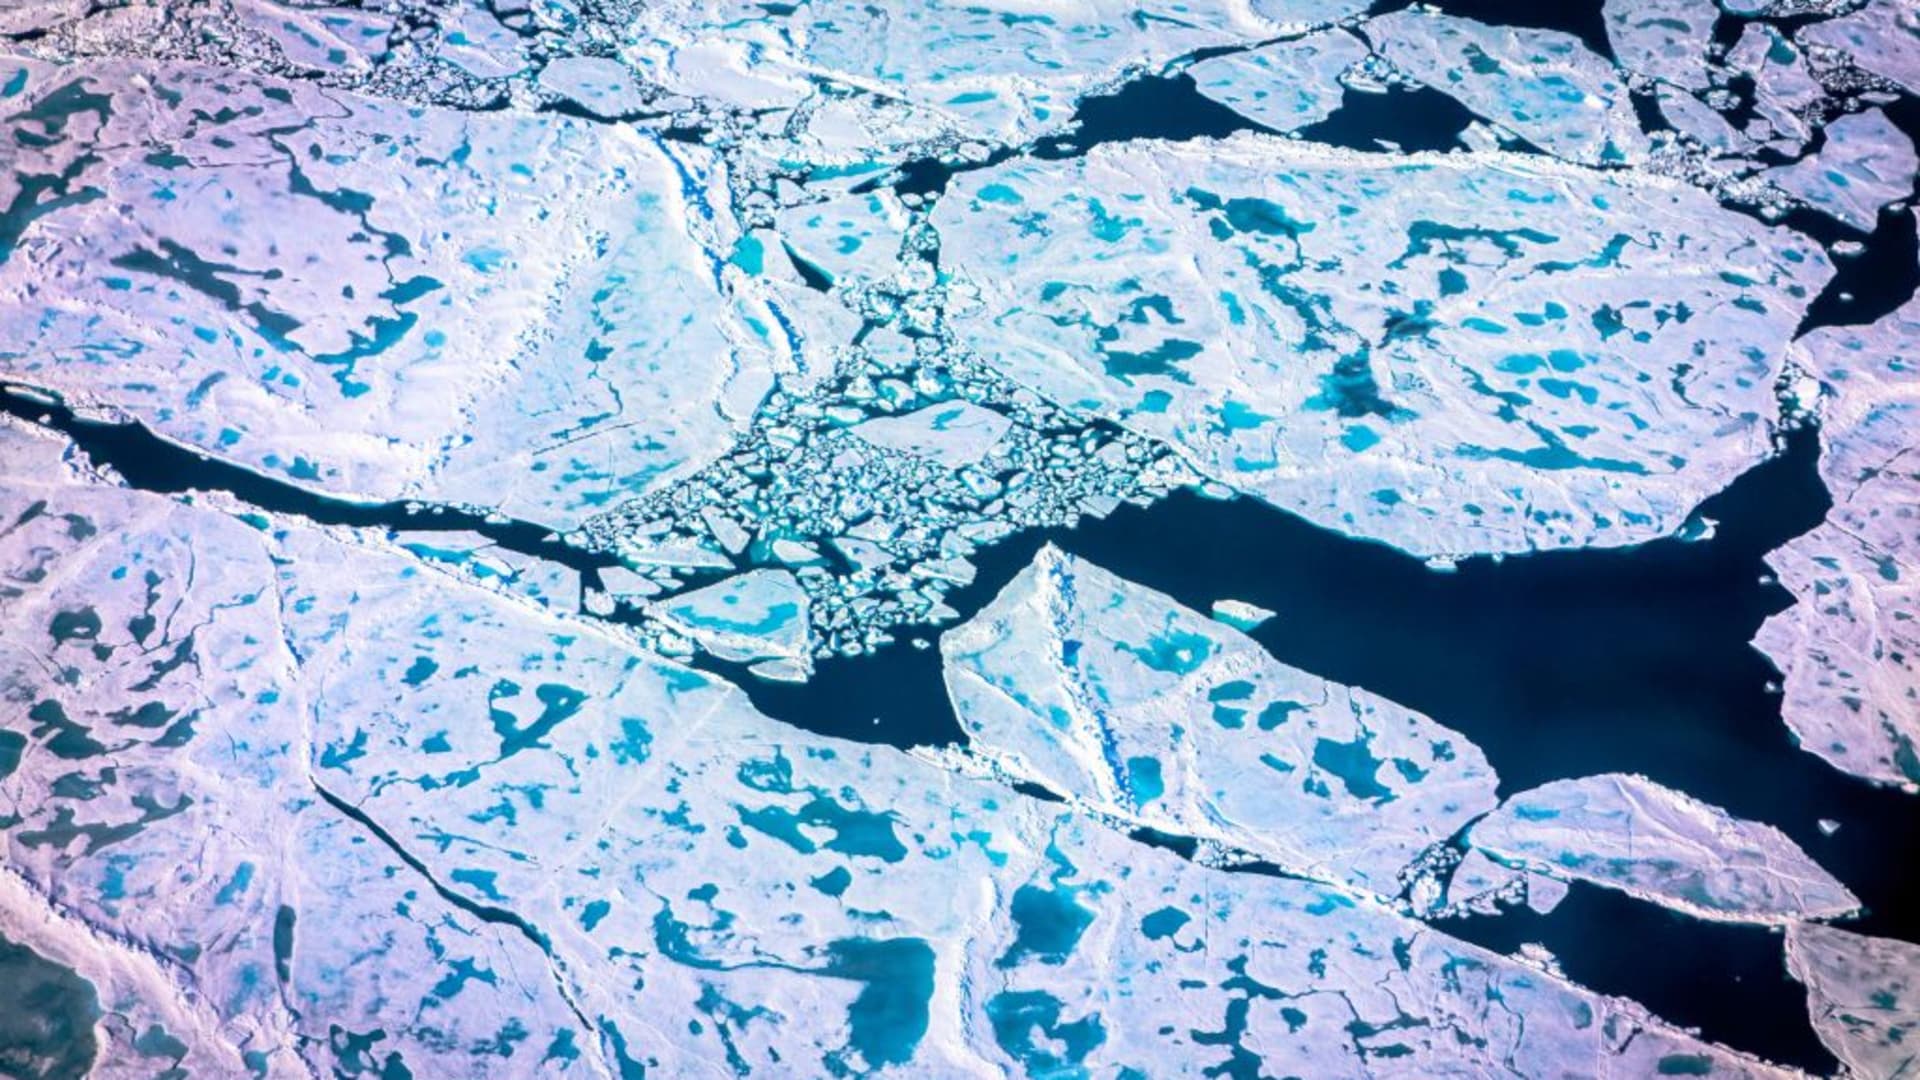 An aerial view of pancake ice and melt on July 19, 2022 as captured on a NASA Gulfstream V plane while on an airborne mission with University of Texas scientists to measure melting Arctic sea ice. New observations from ICESAT-2 show remarkable Arctic Sea ice thinning in just three years. Over the past two decades, the Arctic has lost about one-third of its winter sea ice volume, largely due to a decline in sea ice that persists over several years, called multiyear ice, according to a new study. The study also found sea ice is likely thinner than previous estimates.